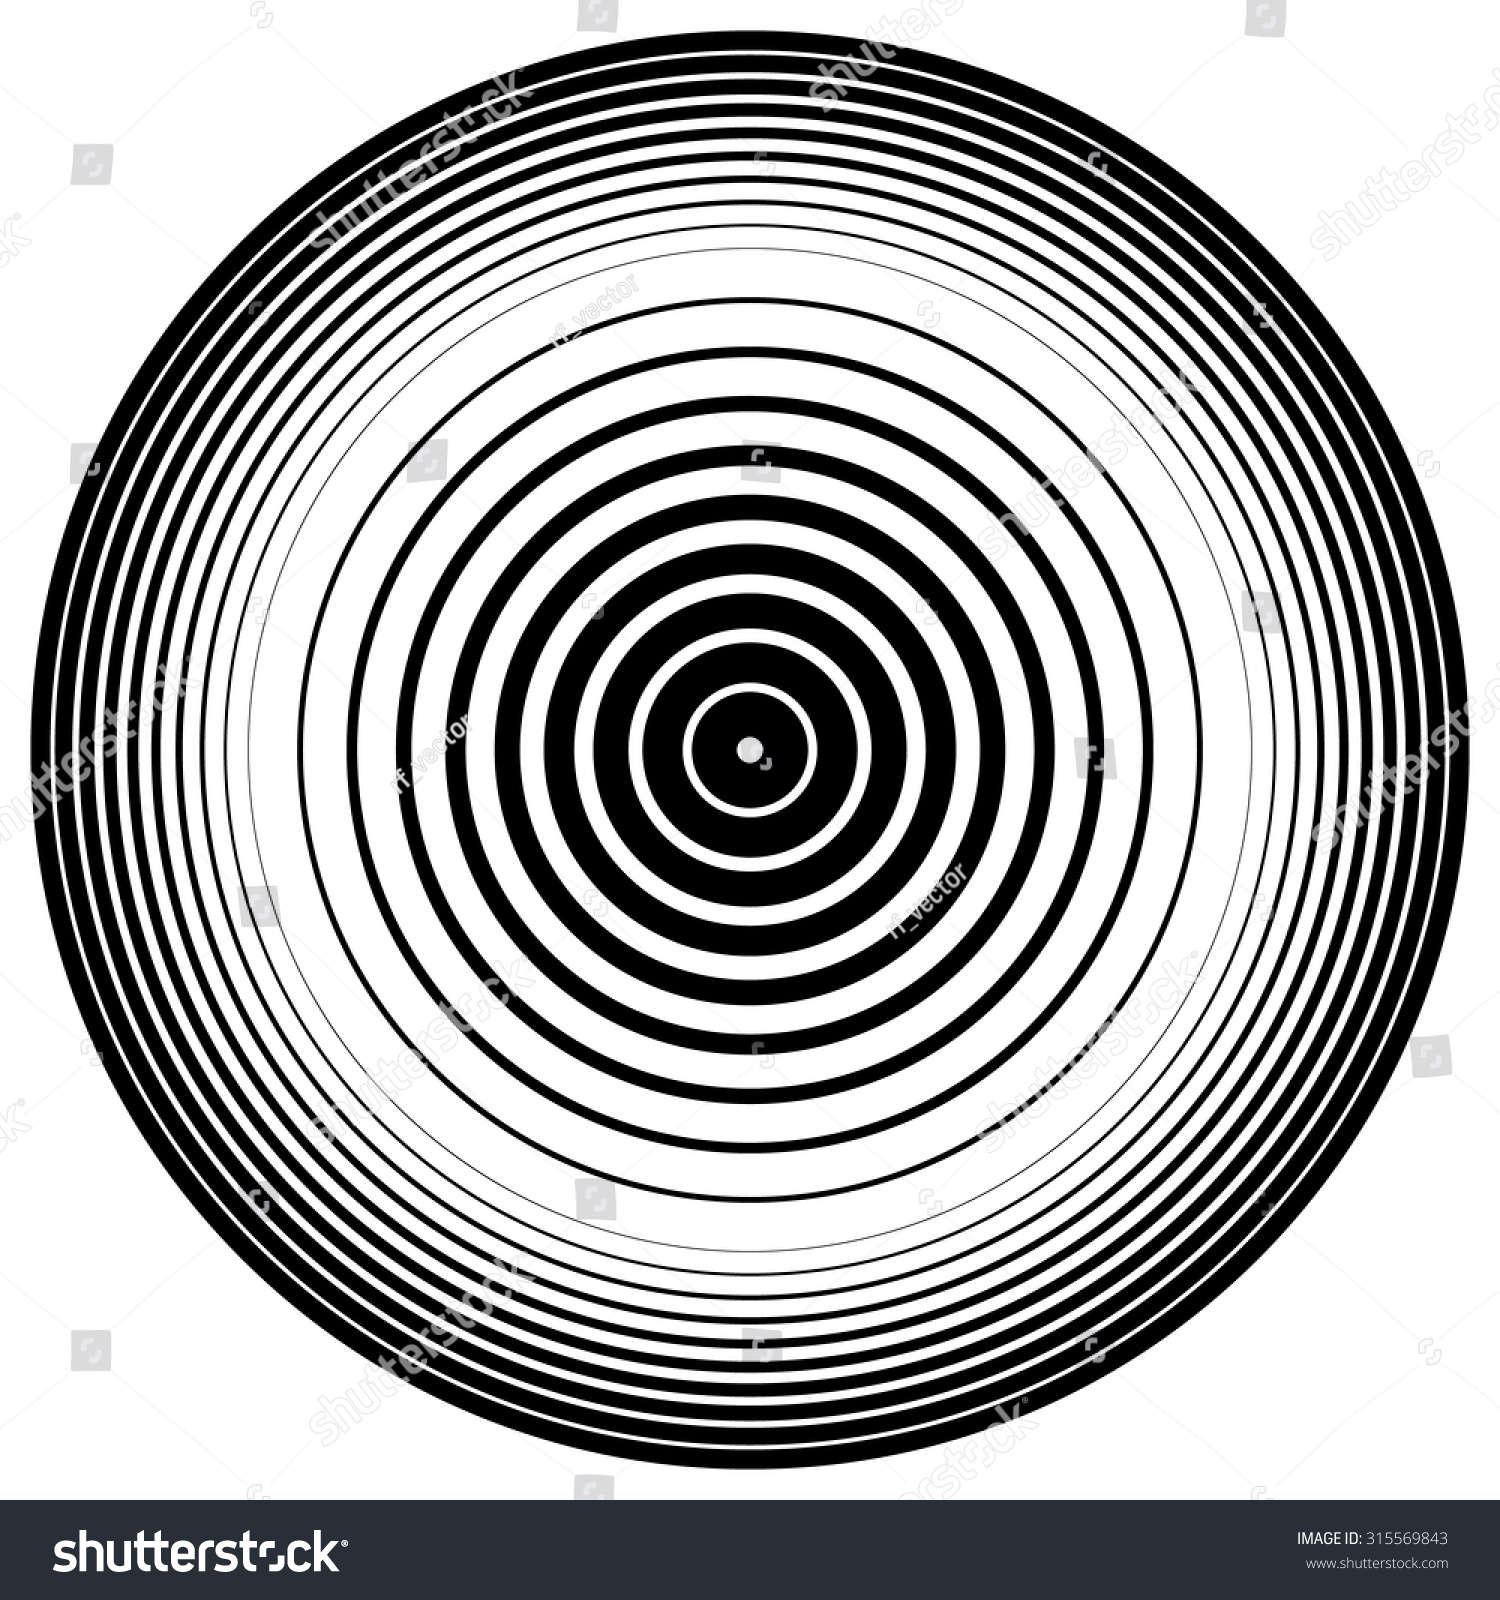 Abstract Circle Element Concentric Circles Ripple Stock Vector ...